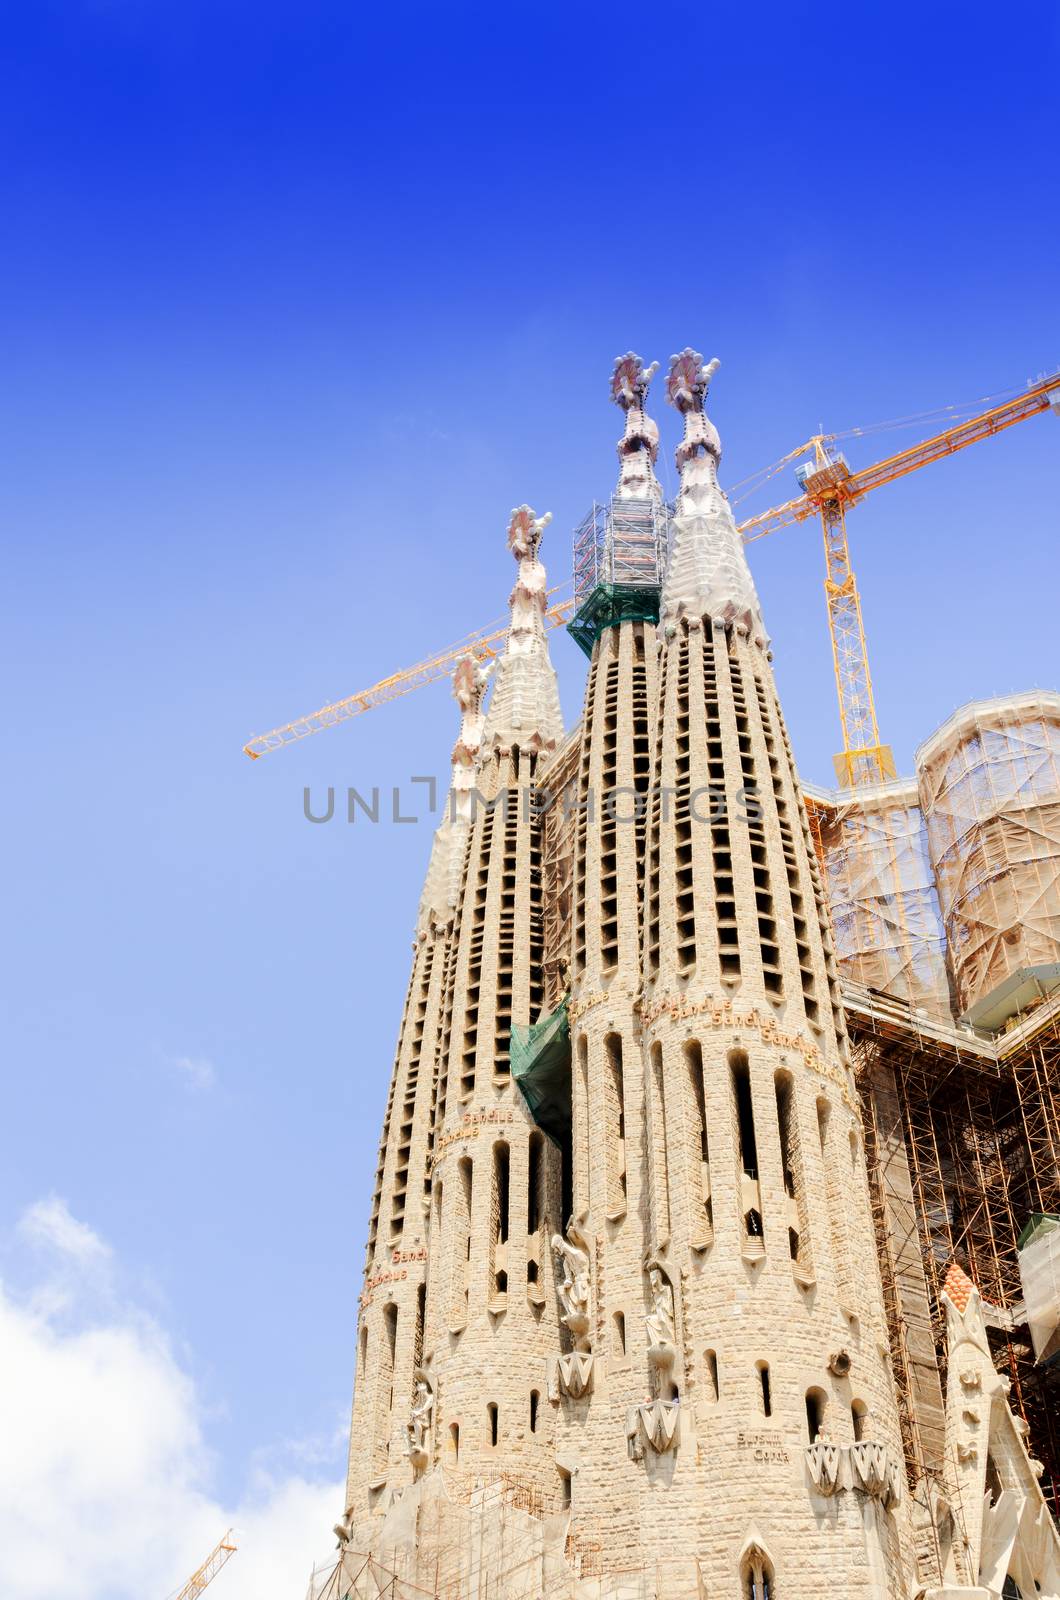 BARCELONA, SPAIN - JULY 13, 2012: The Basilica of La Sagrada Familia against blue sky.Fabulous creations of the great architect by Antoni Gaudi, its construction began in 1882 and is not finished yet.